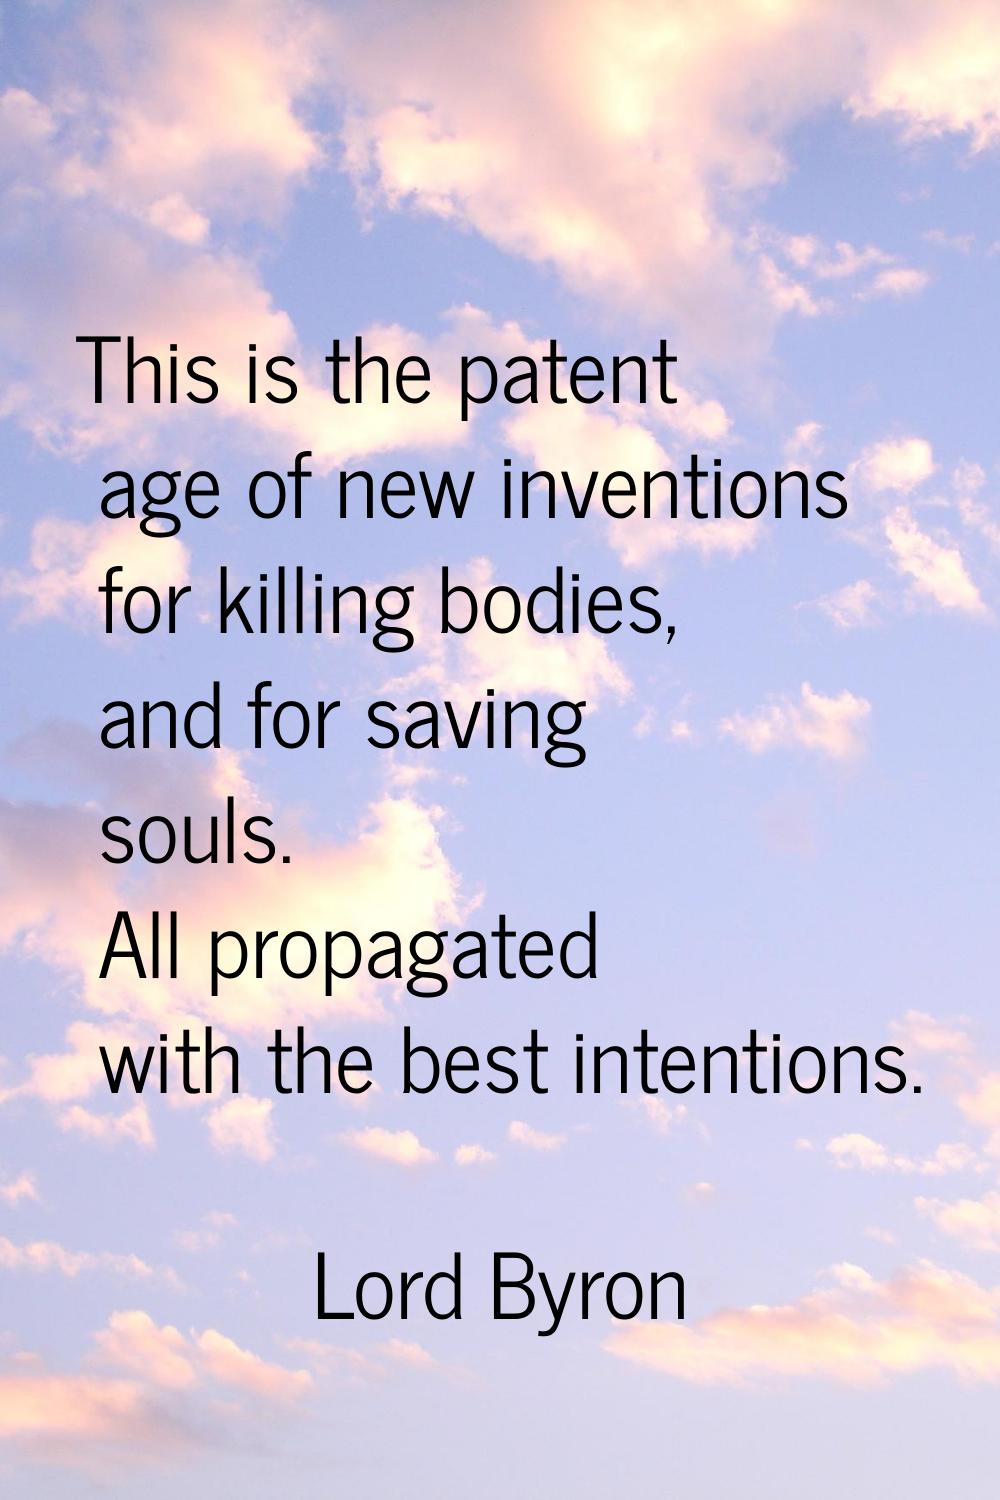 This is the patent age of new inventions for killing bodies, and for saving souls. All propagated w